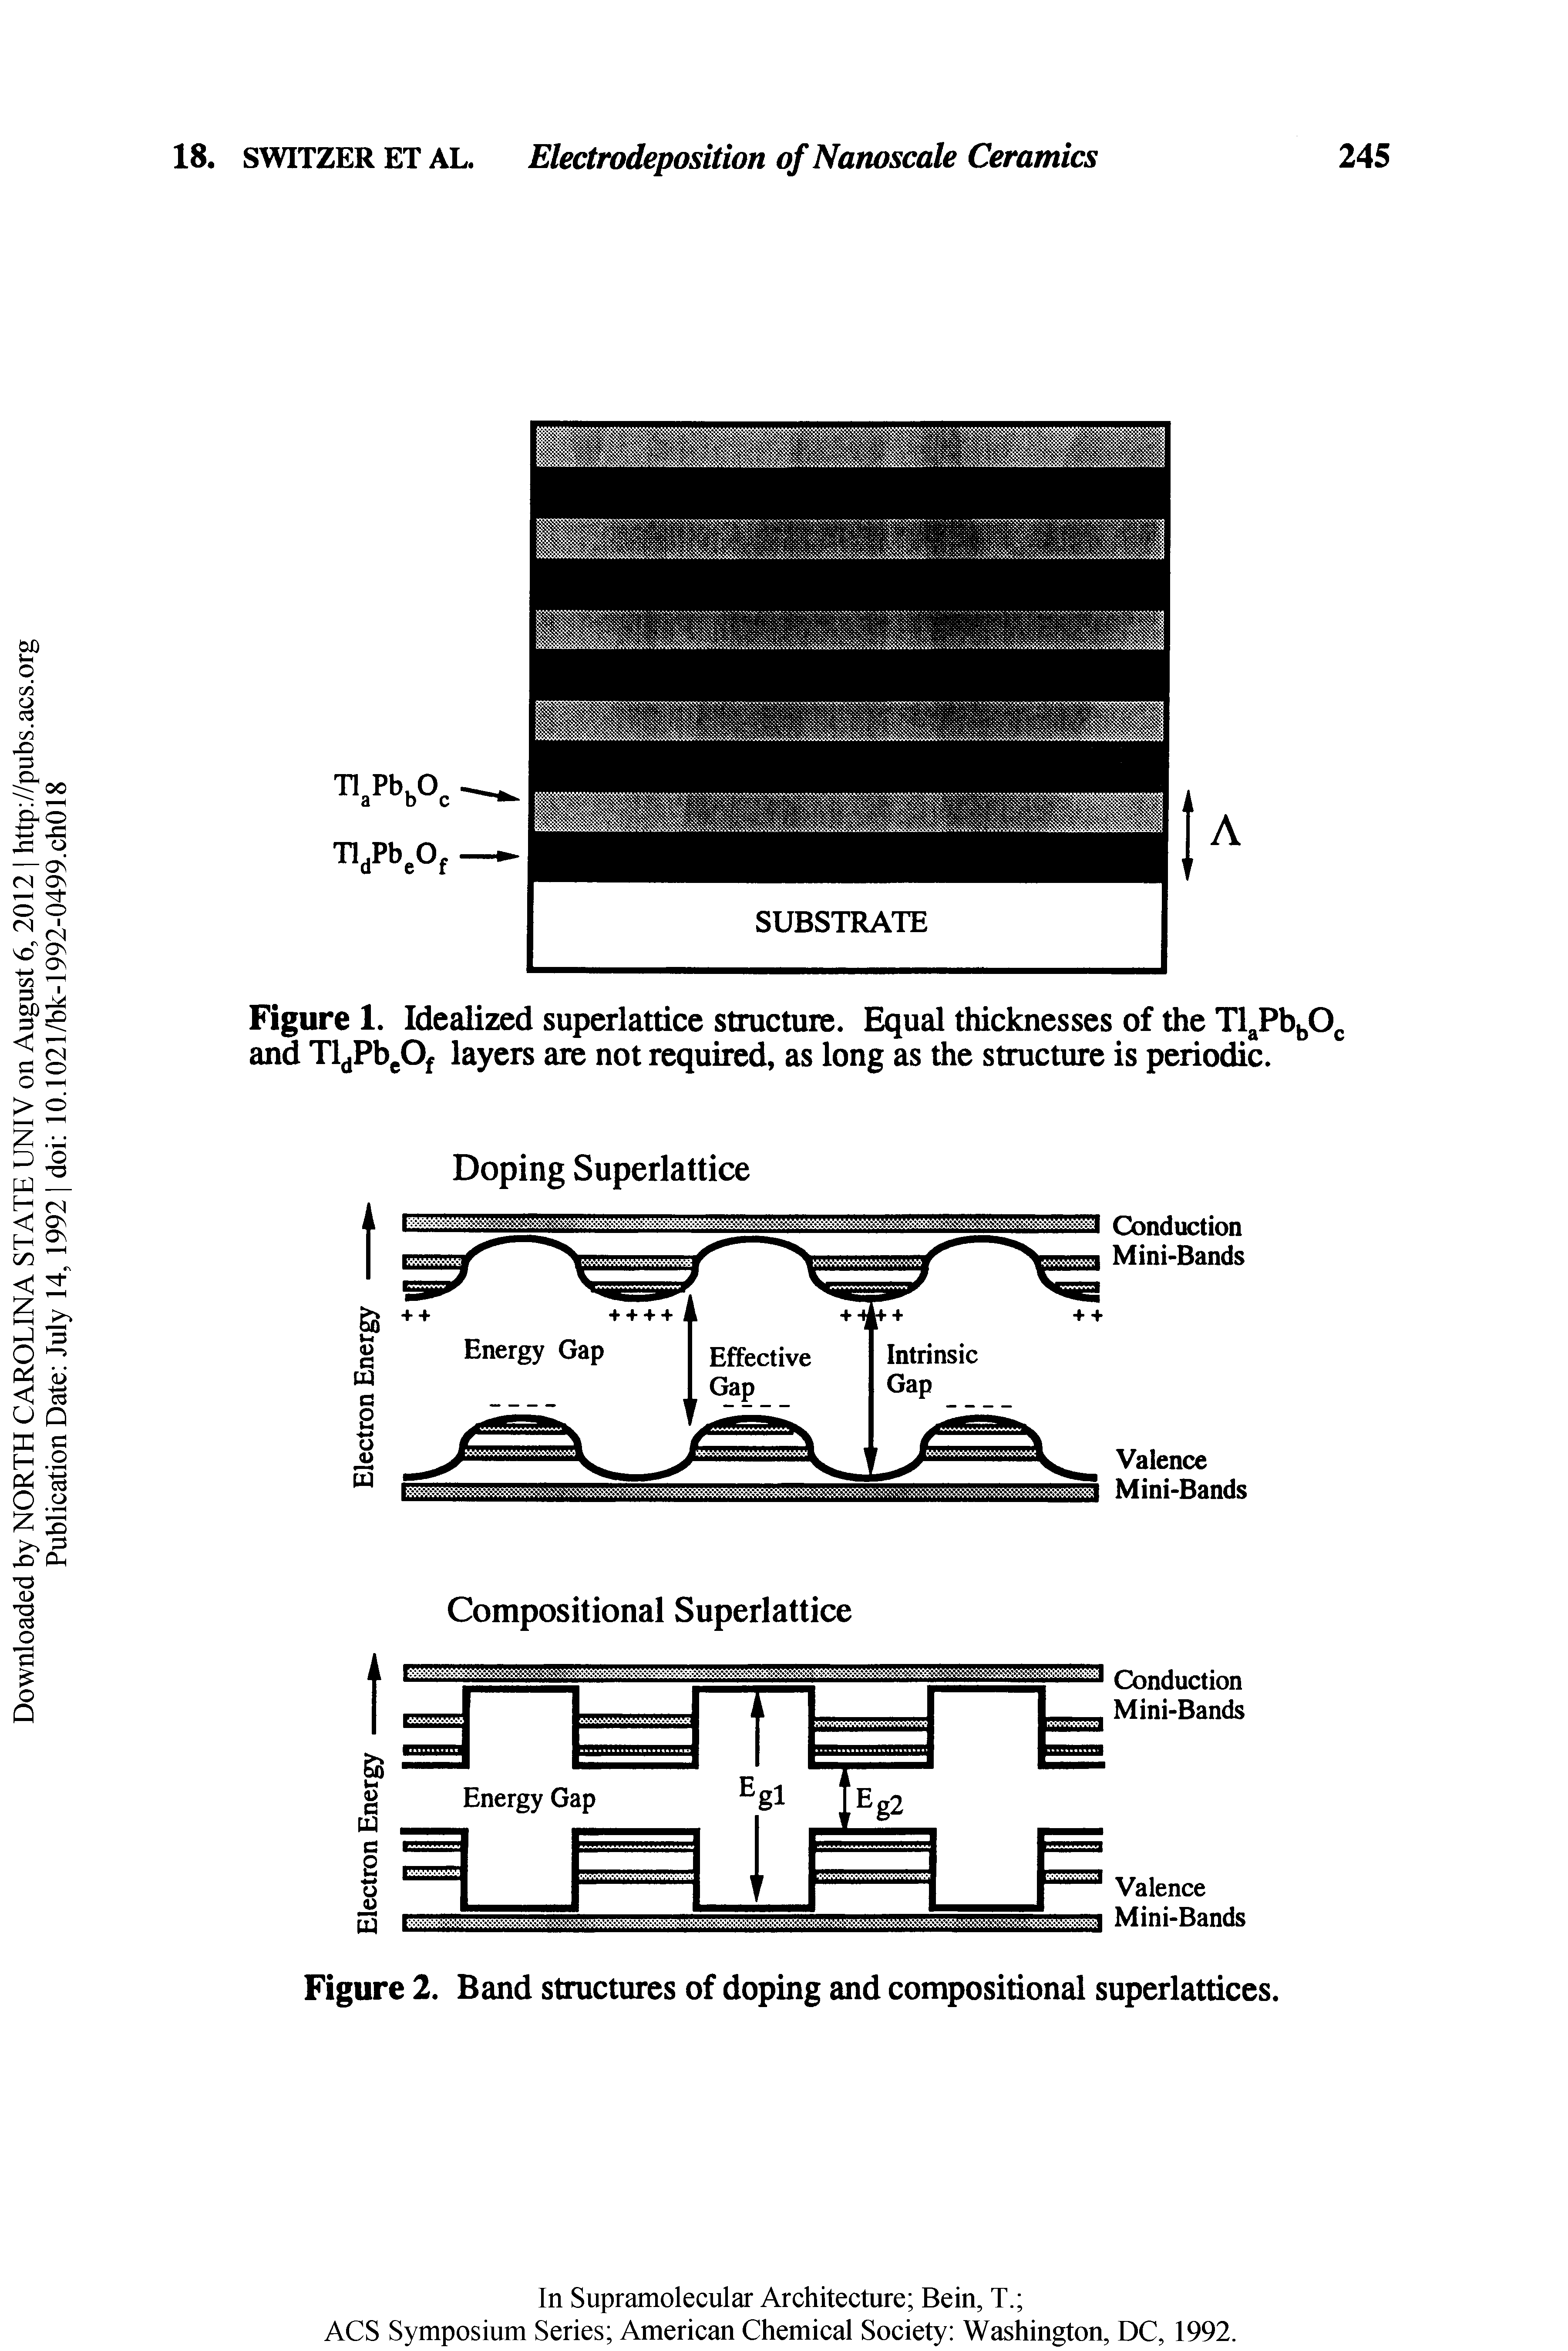 Figure 2. Band structures of doping and compositional superlattices.